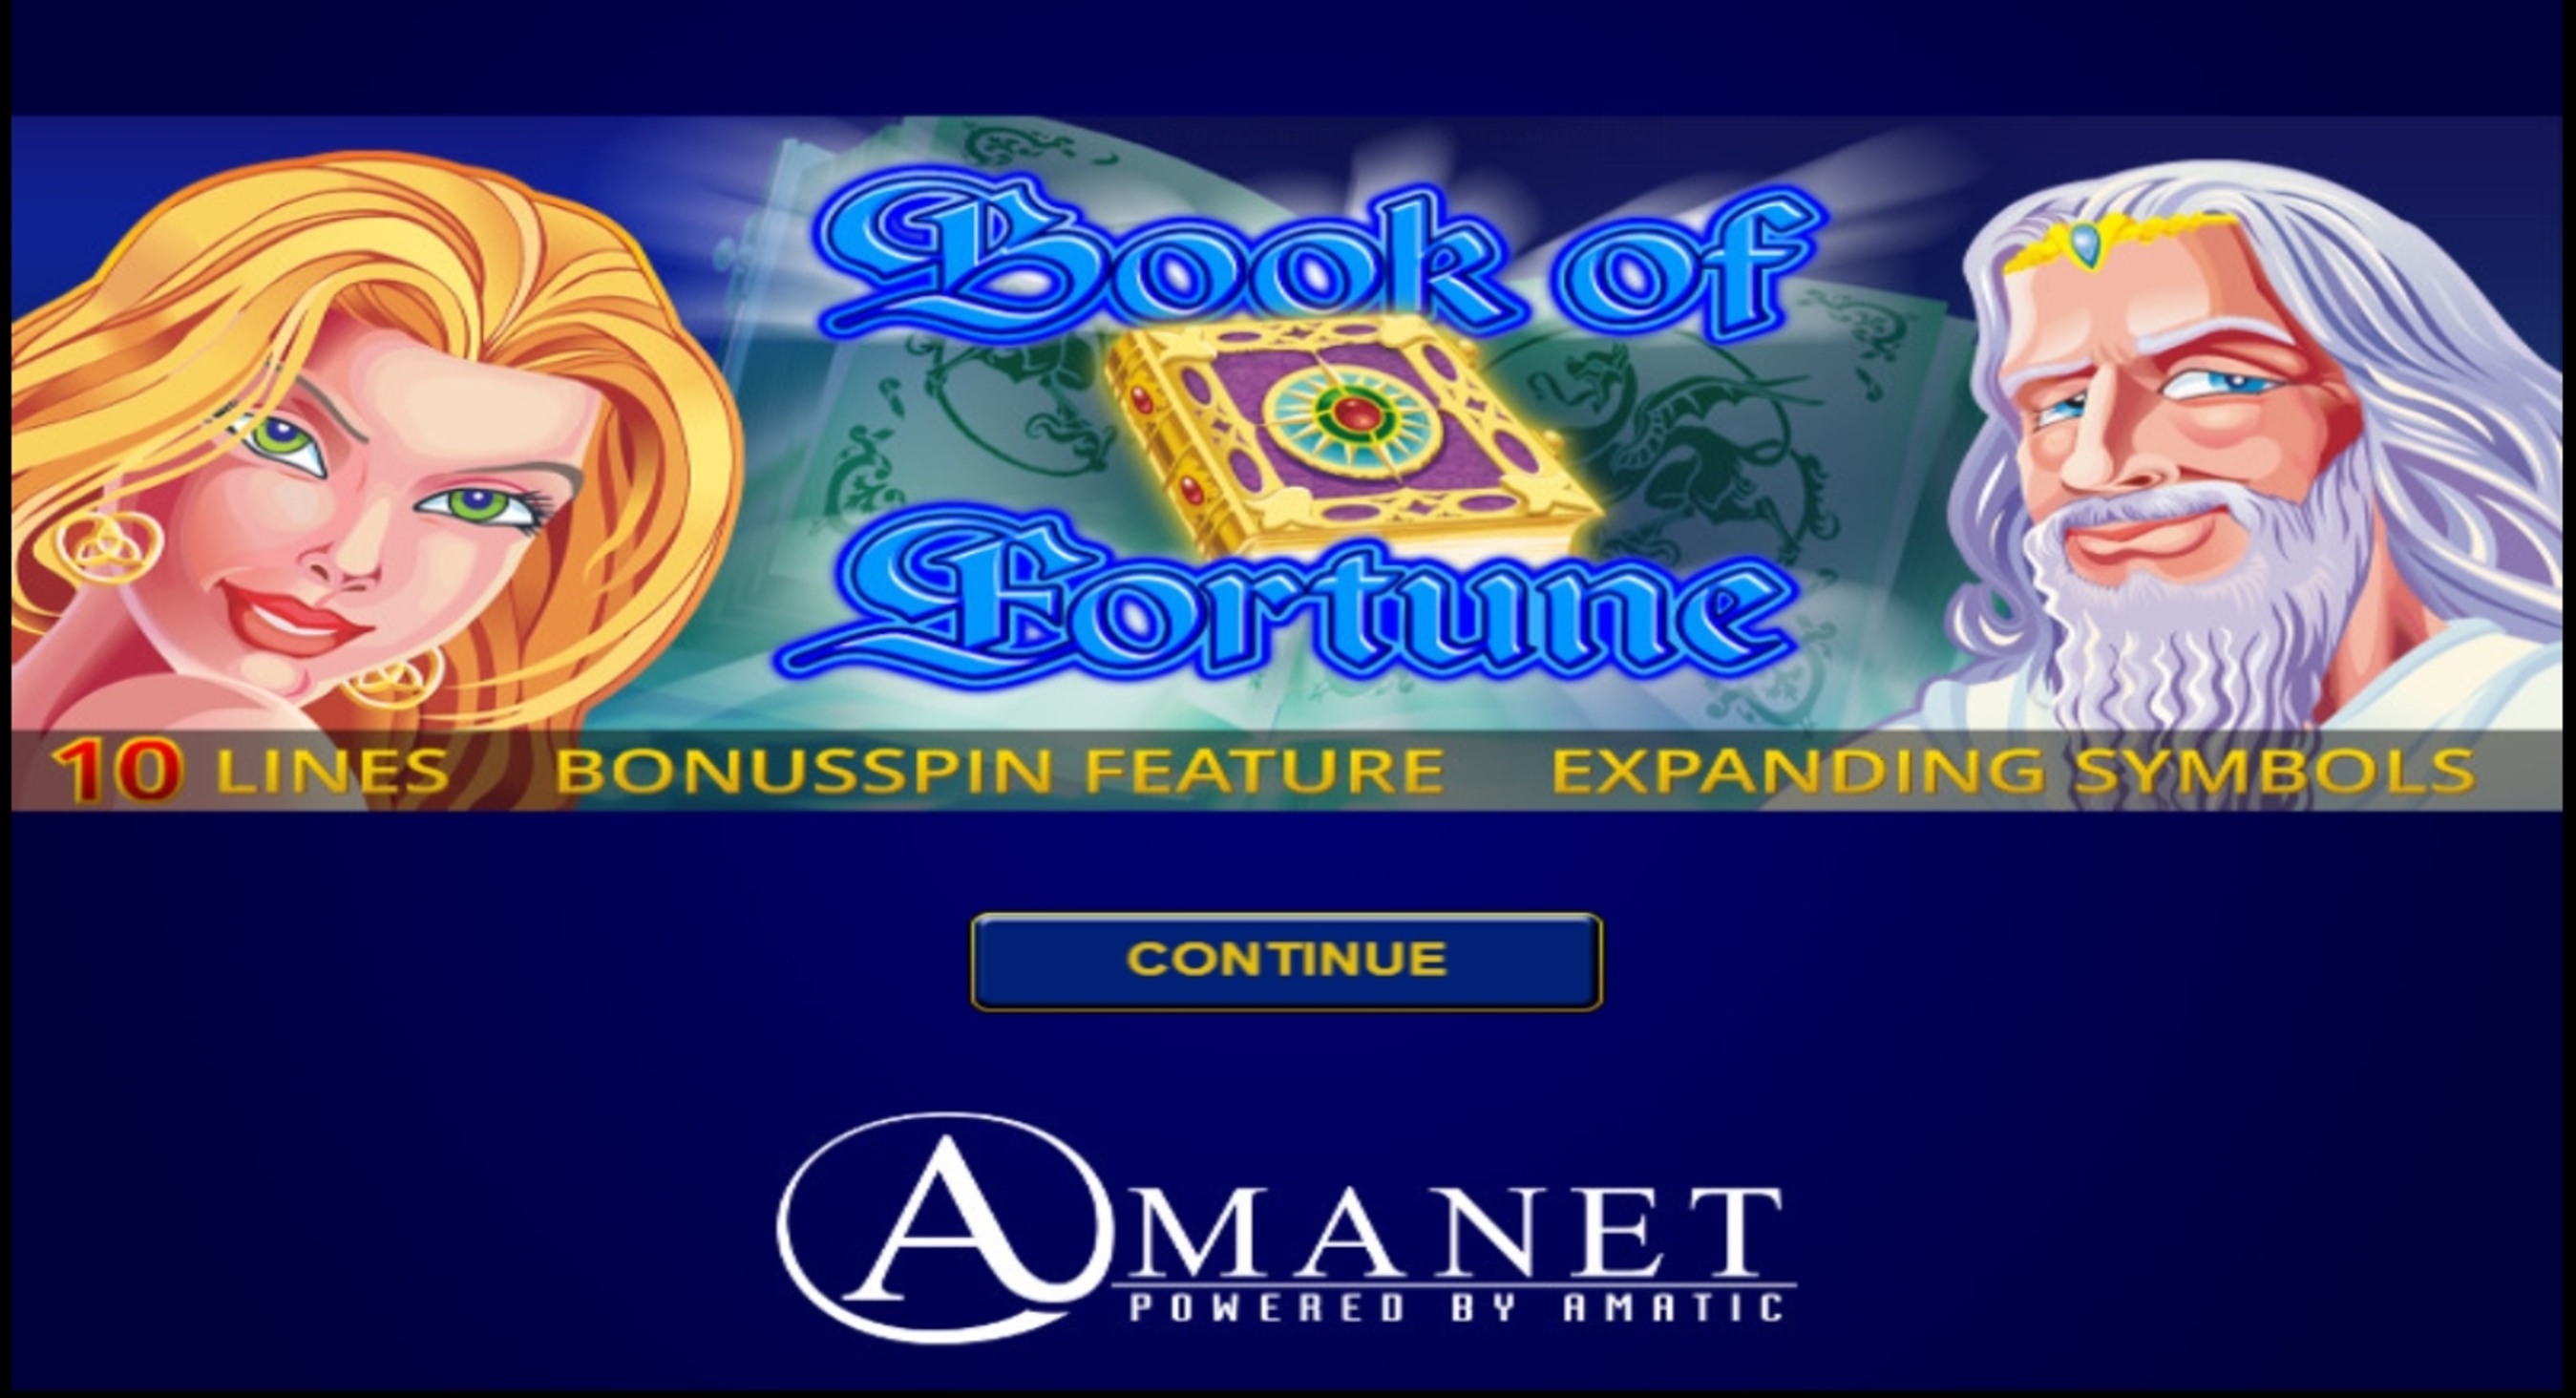 Play Book of Fortune Free Casino Slot Game by Amatic Industries